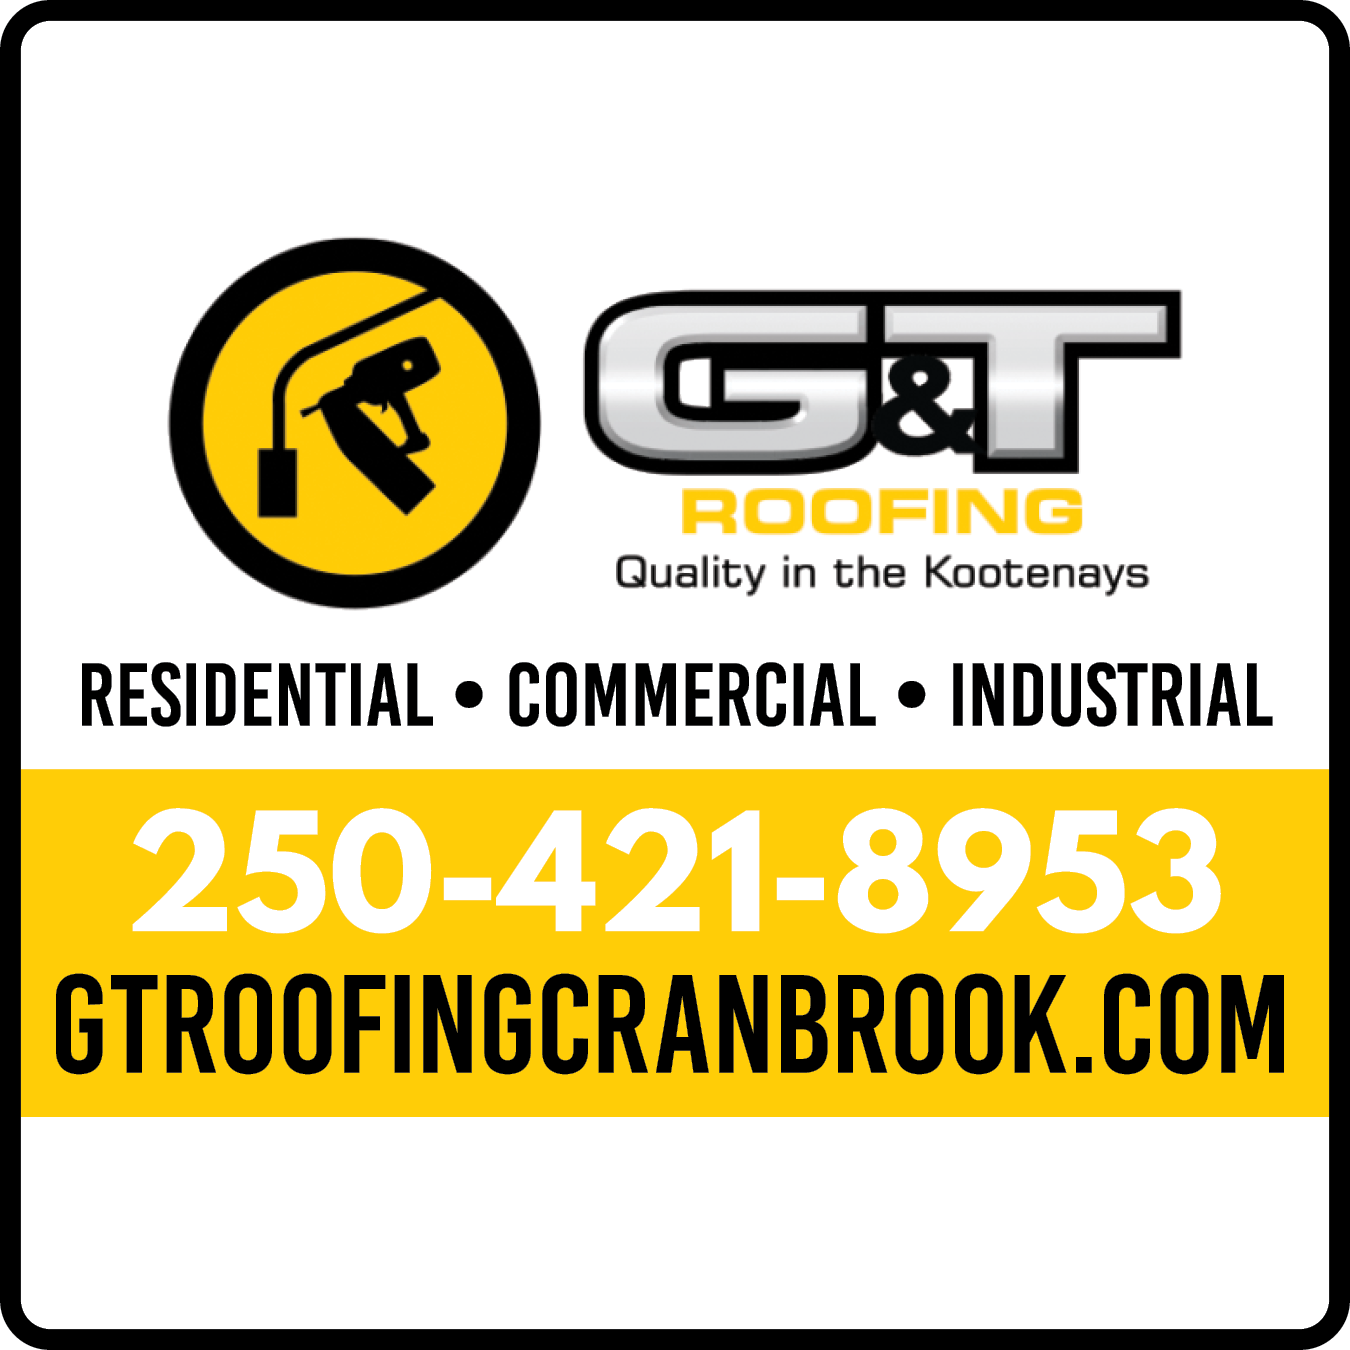 G&T Roofing